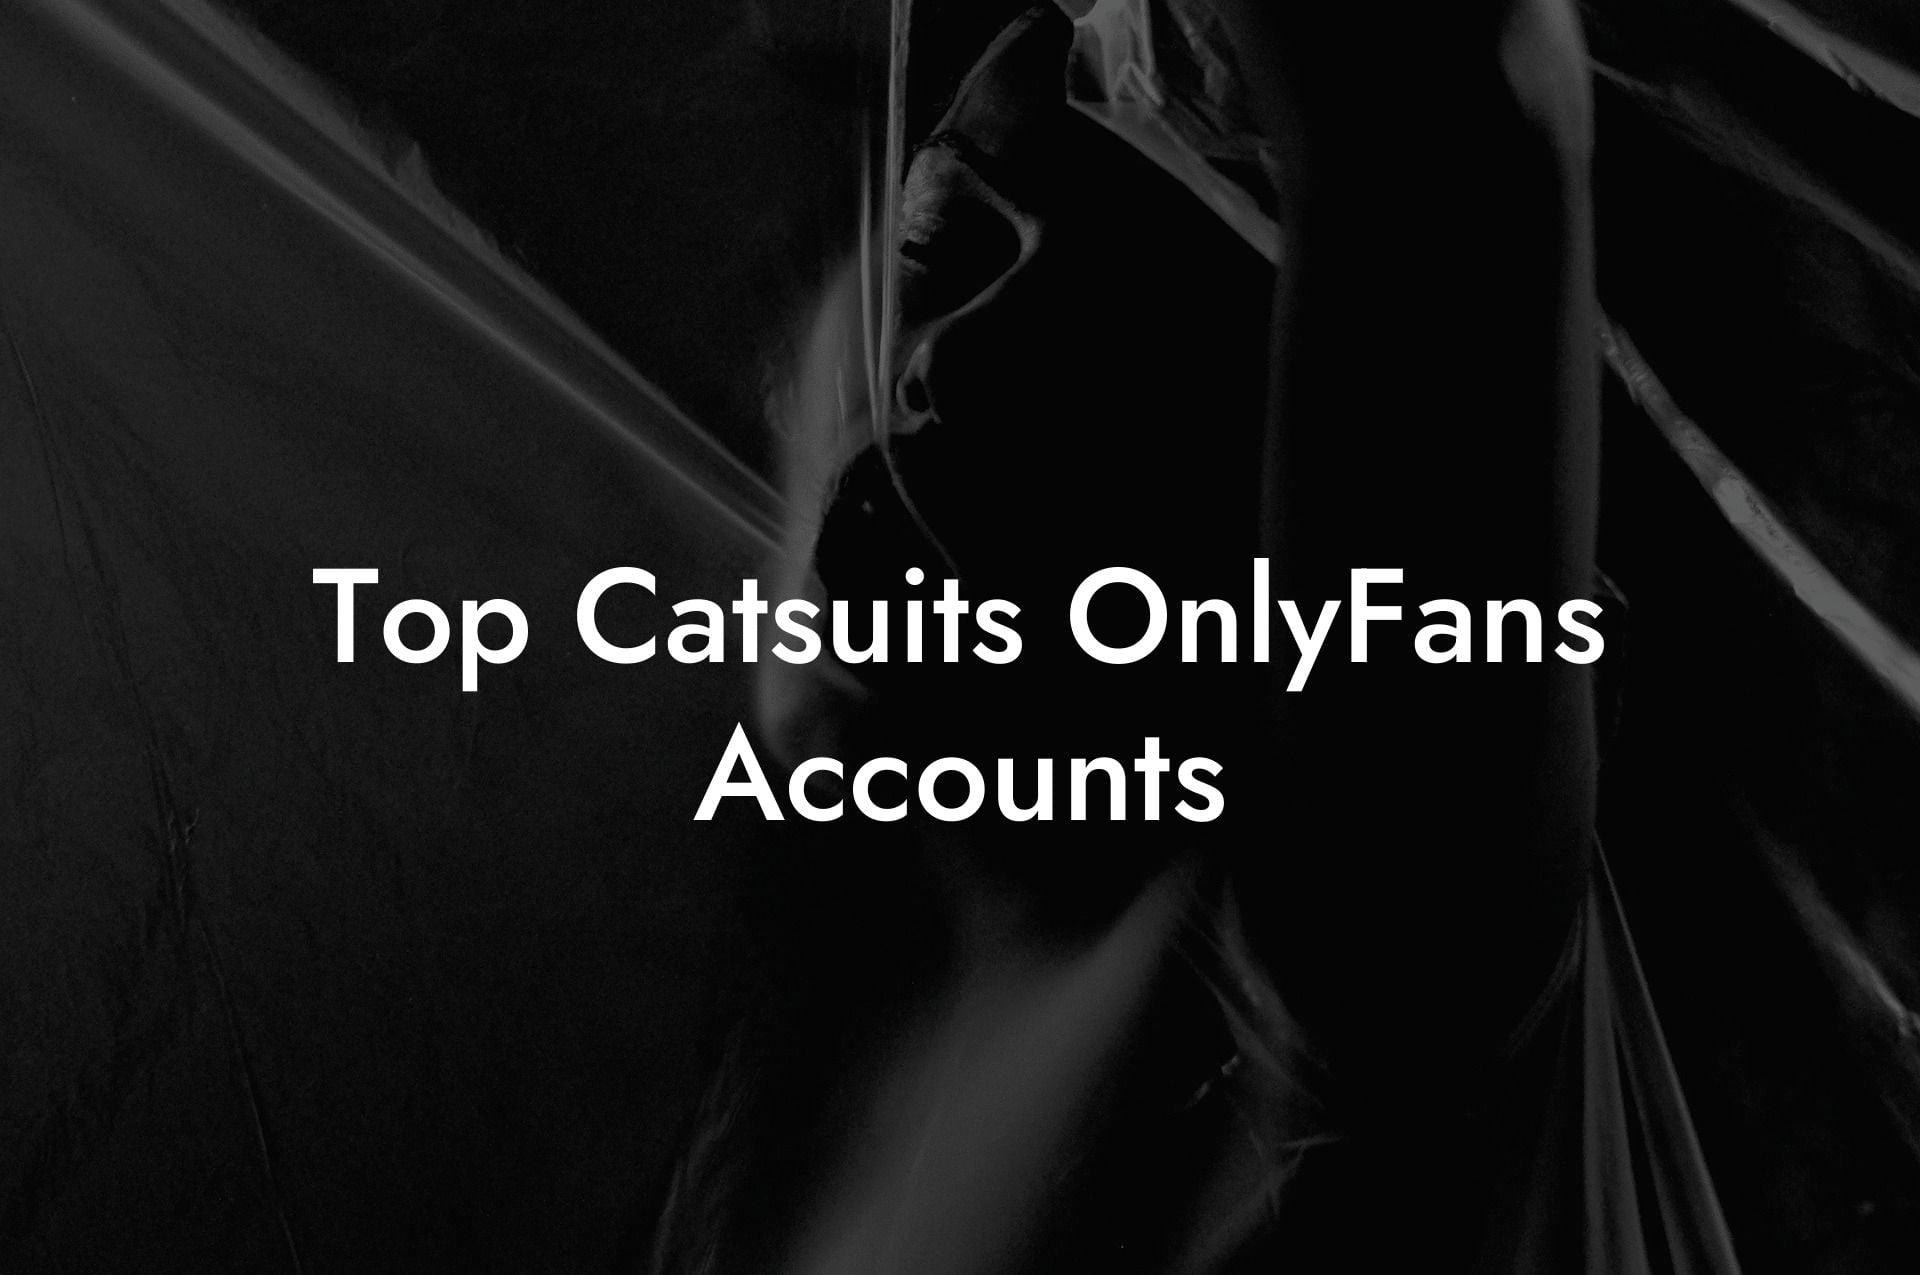 Top Catsuits OnlyFans Accounts